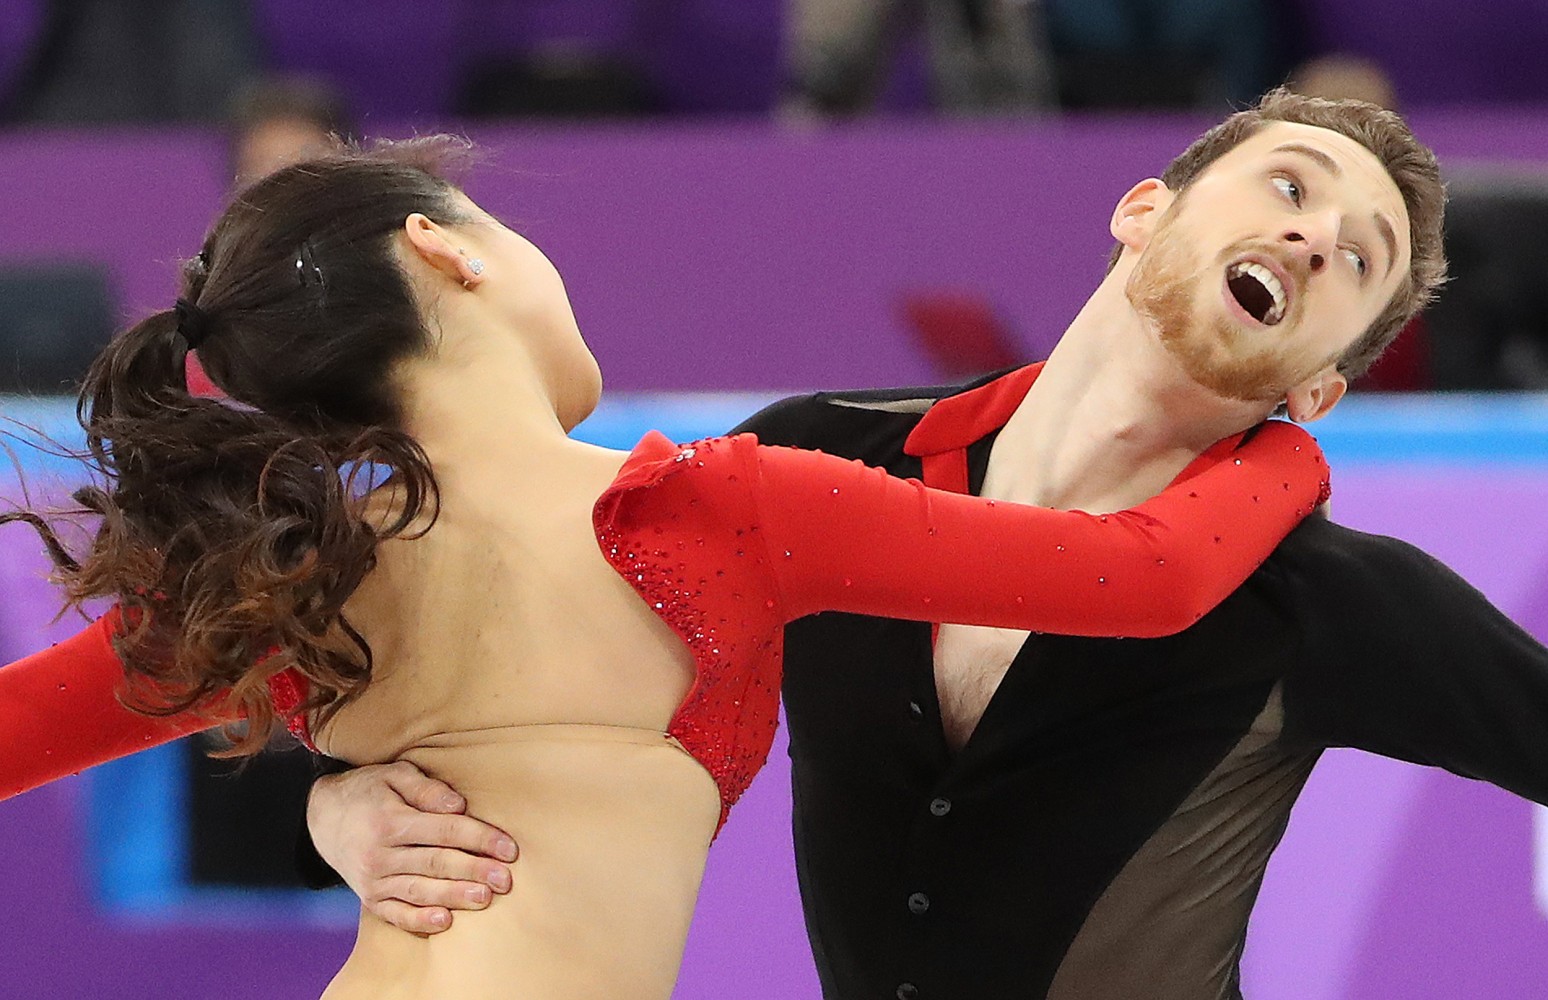 French ice skater suffers wardrobe malfunction.